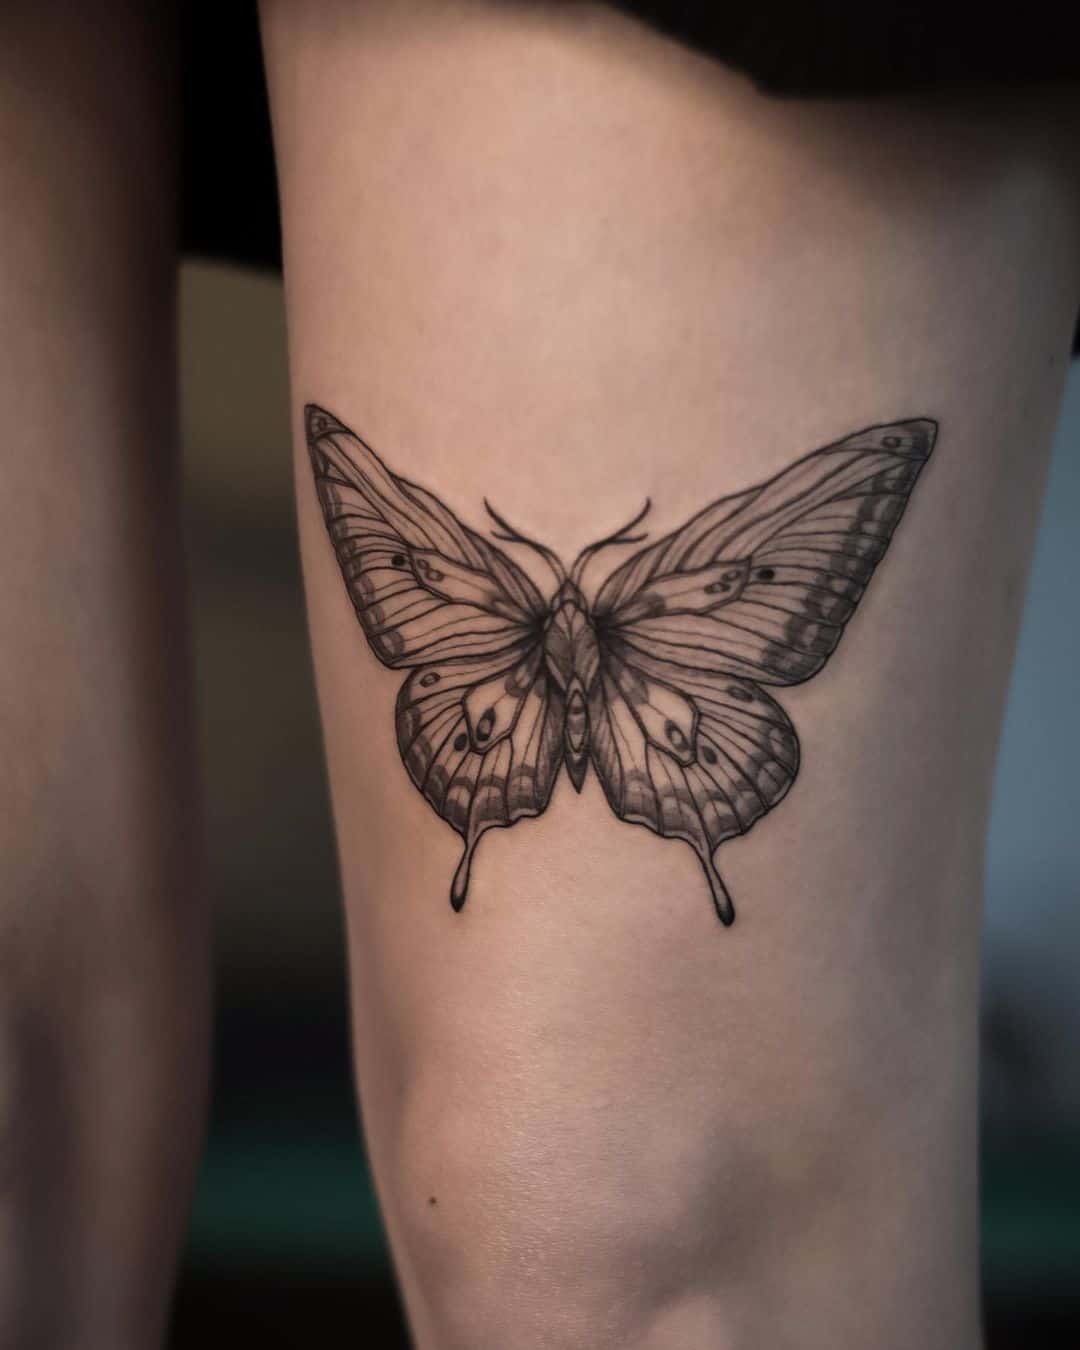 Butterfly Tattoos For Men As A Celebration Of Nature's Beauty